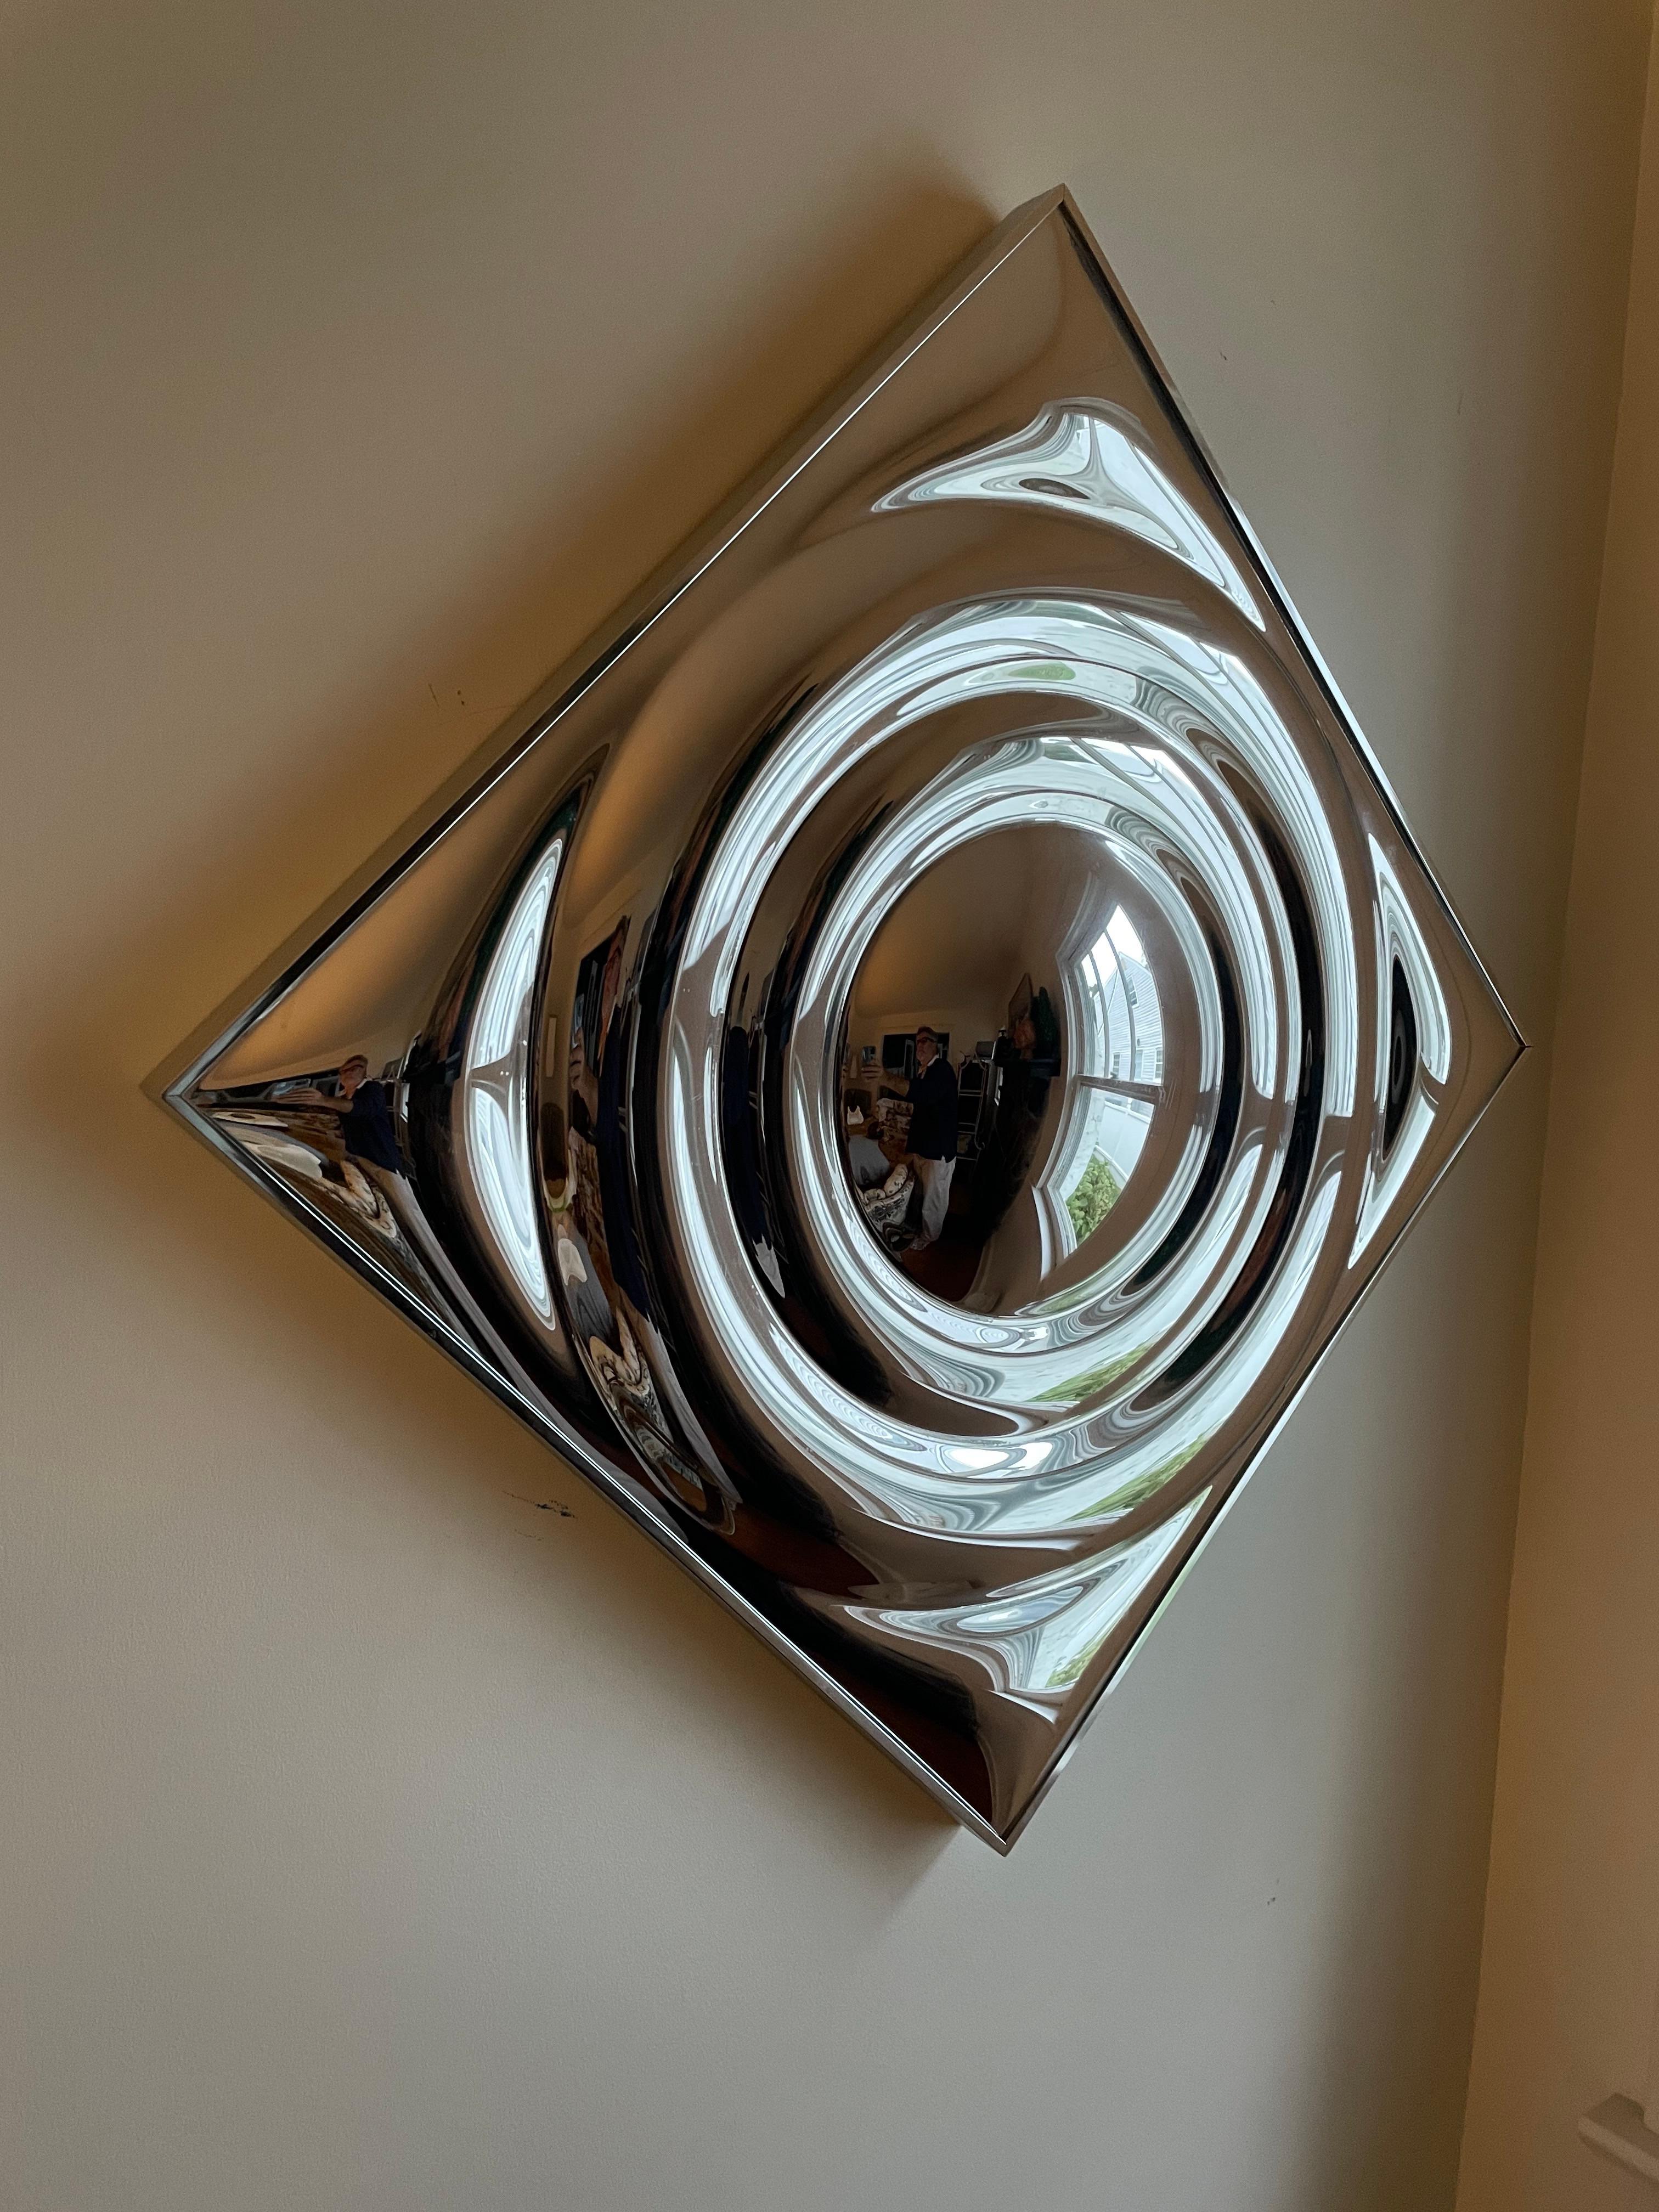 Awesome Turner Bubble Mirror. Unique ONE bubble design with multiple boarders casting wonderful reflection.
As pictured 33.75”
Squared, 24”x24”